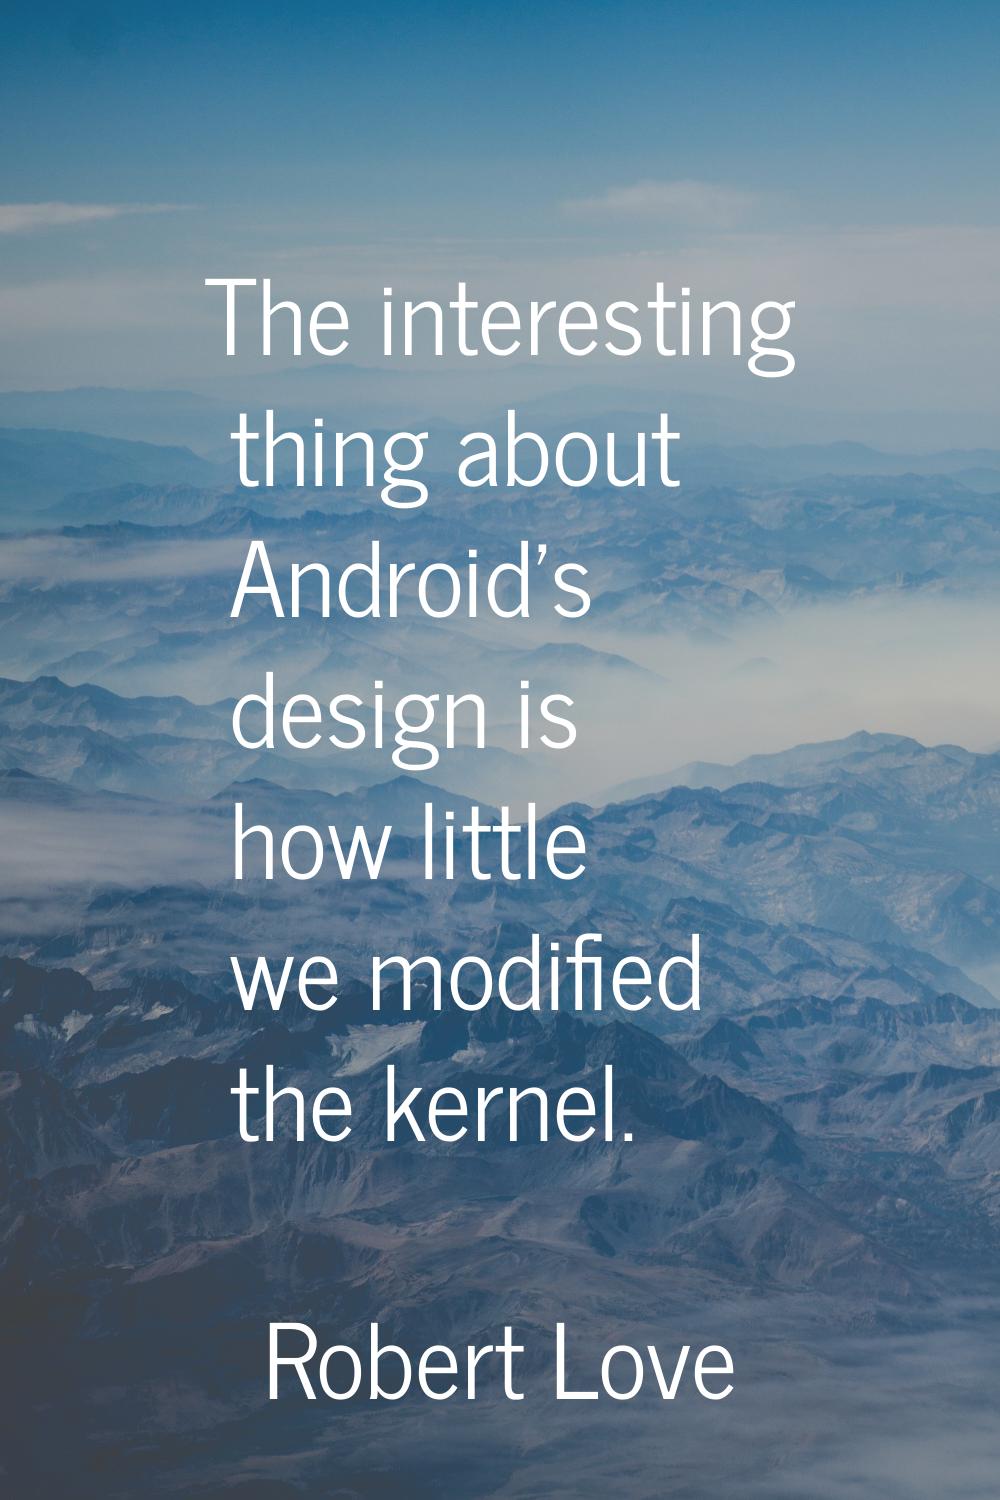 The interesting thing about Android's design is how little we modified the kernel.